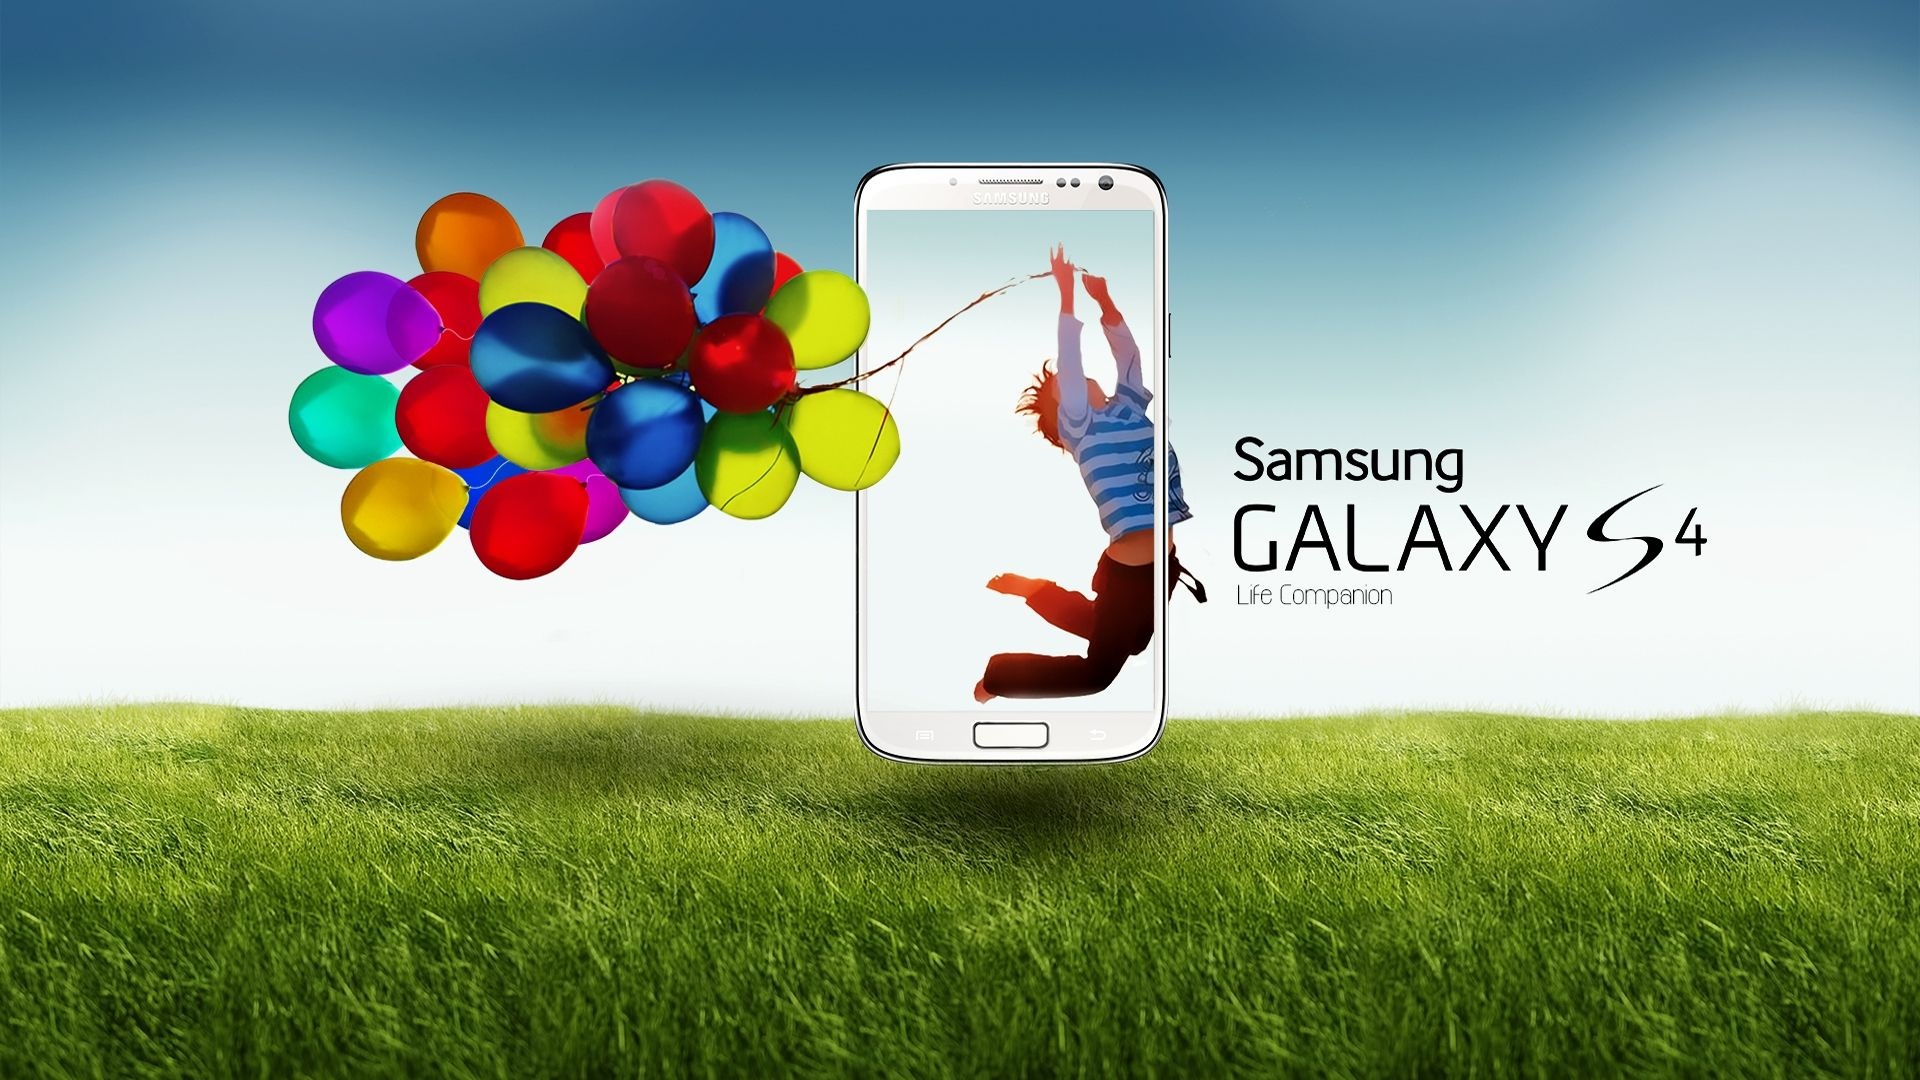 Samsung: Galaxy S4, A series of computing and mobile computing devices, 2013. 1920x1080 Full HD Wallpaper.